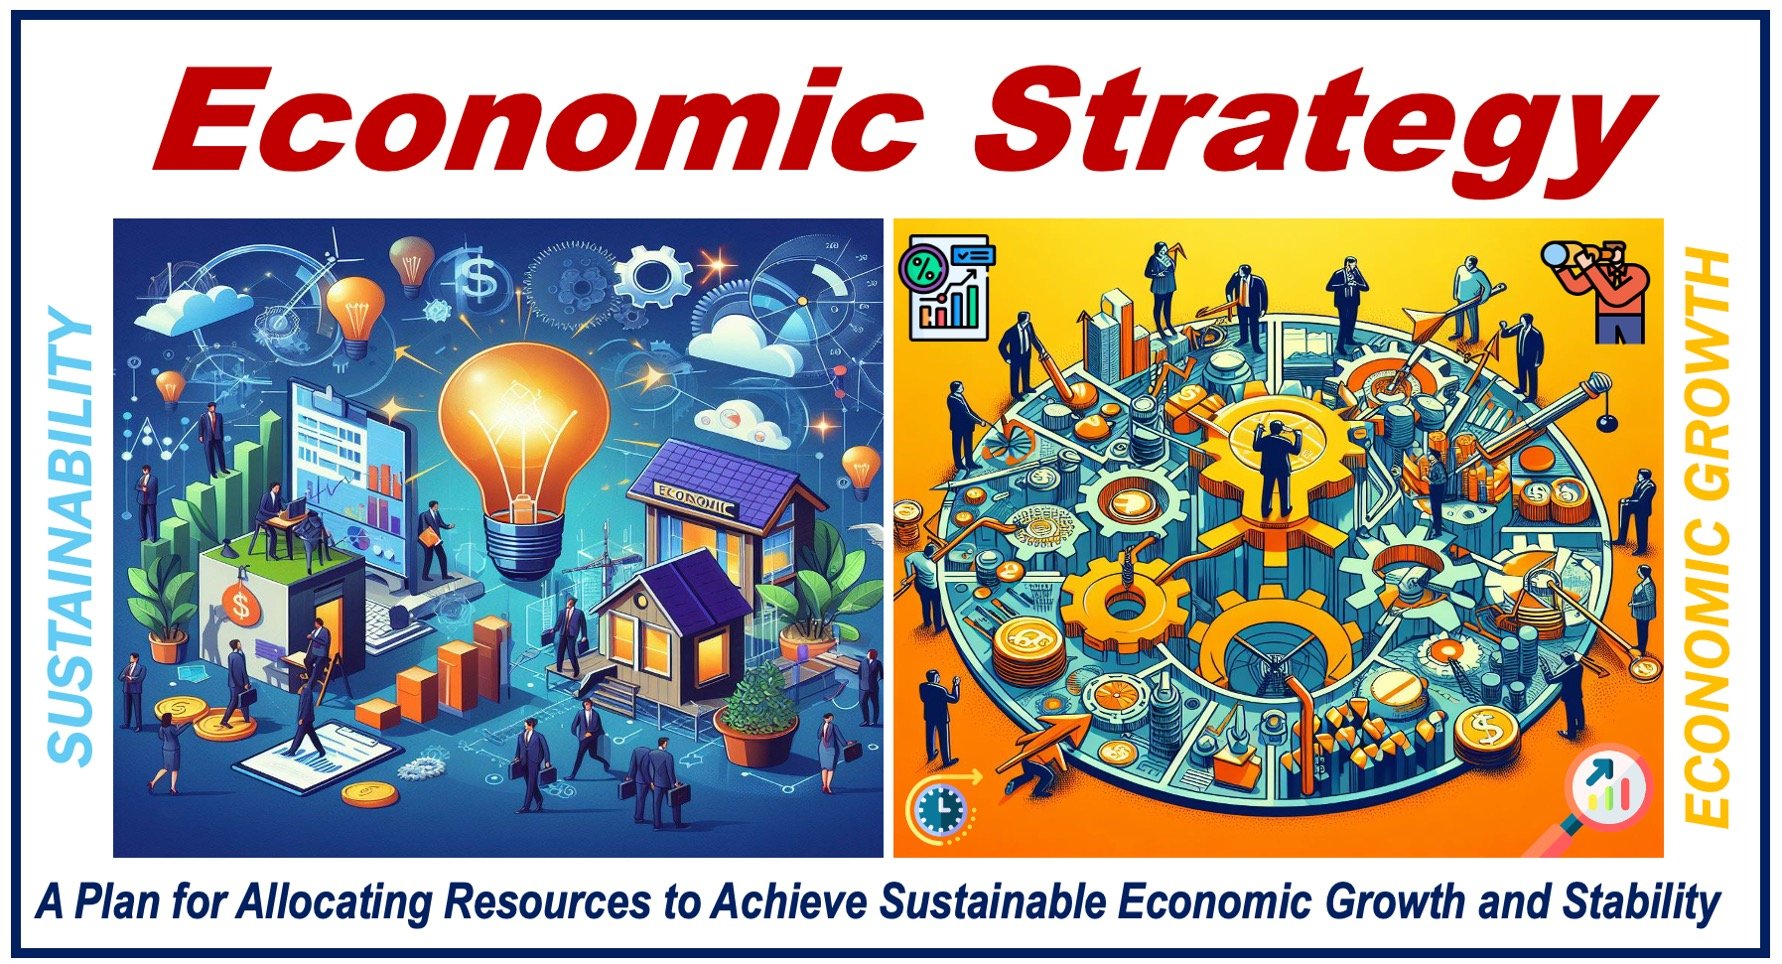 Cogs, wheels, coins, currency symbols, and graphs depicting the concept of an Economic Strategy.